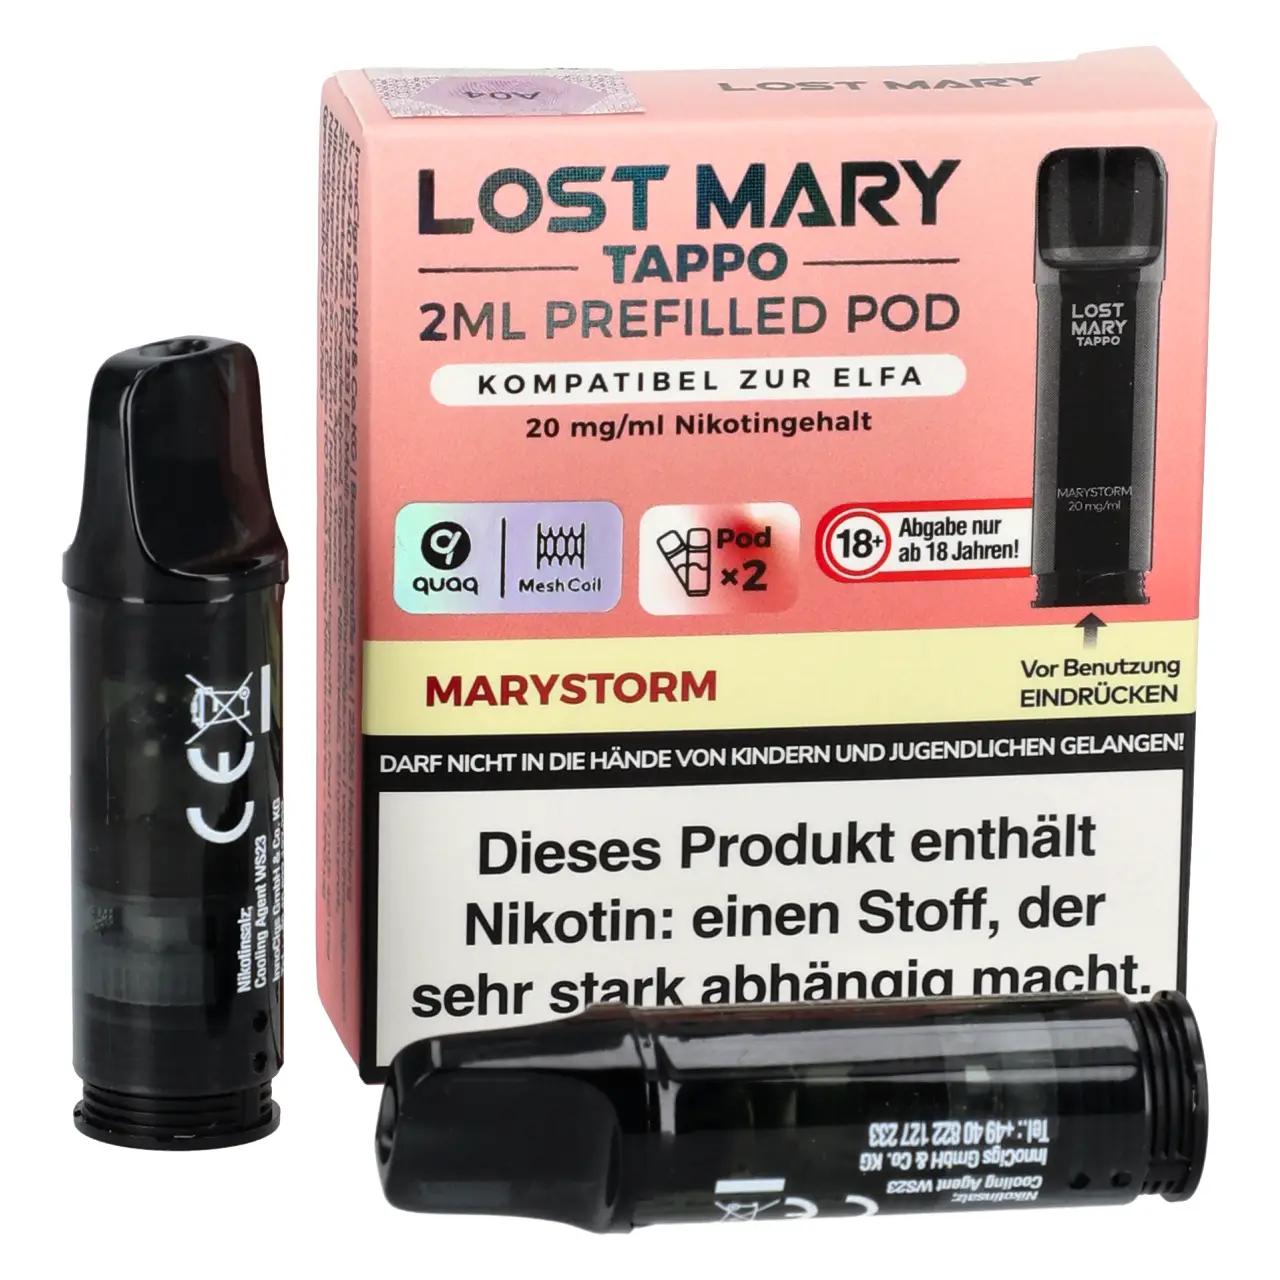 Lost Mary Tappo Prefilled Pod - Marystorm - 2er Packung